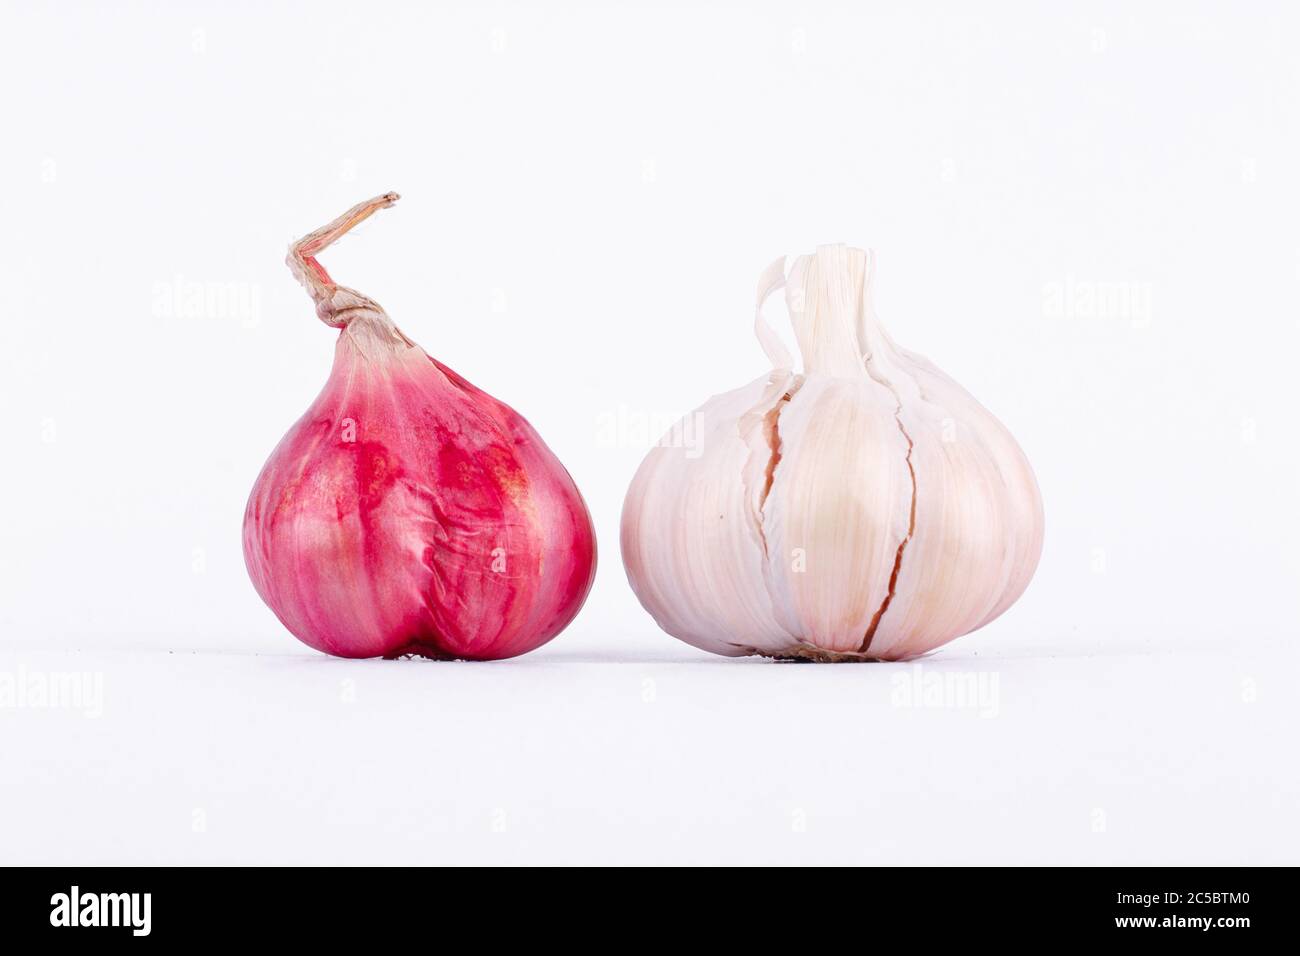 Shallots (Red Onion) and Garlics are popular ingredients in cooking. Stock Photo